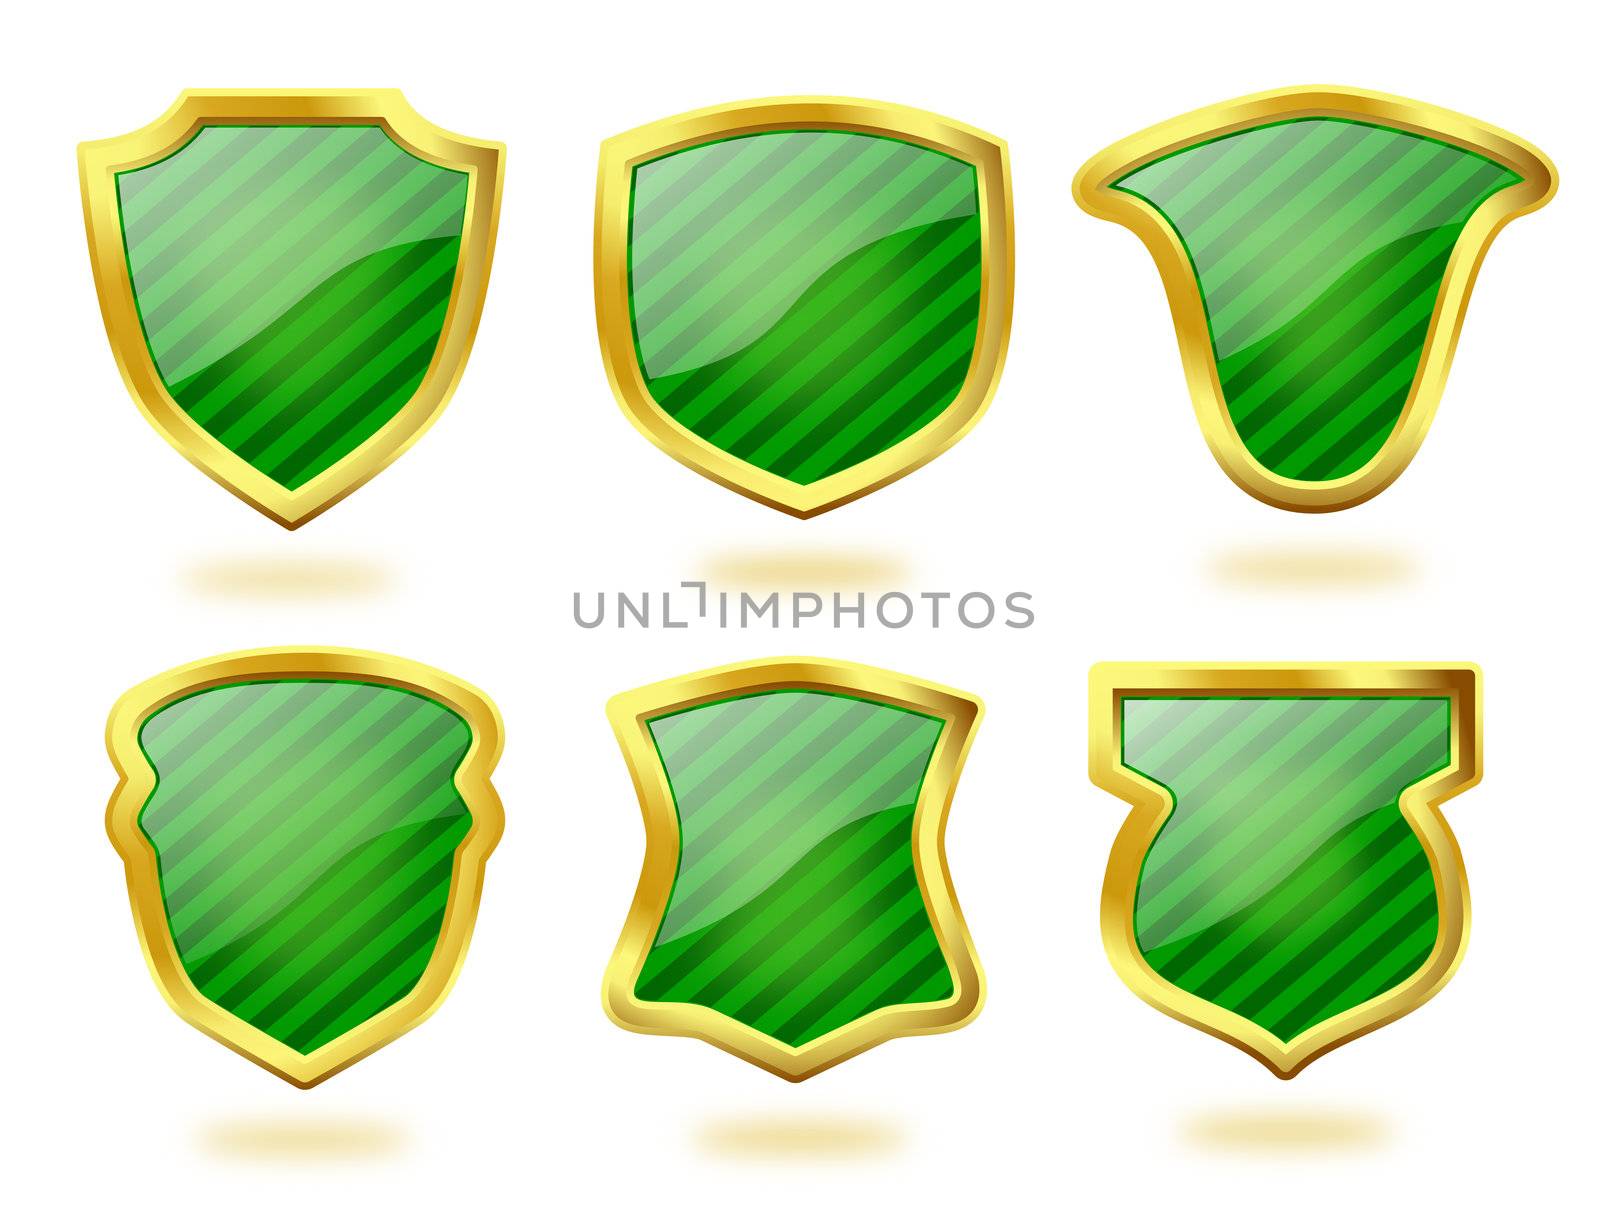 A collection of six shield icon badges in green stripes and with golden frames